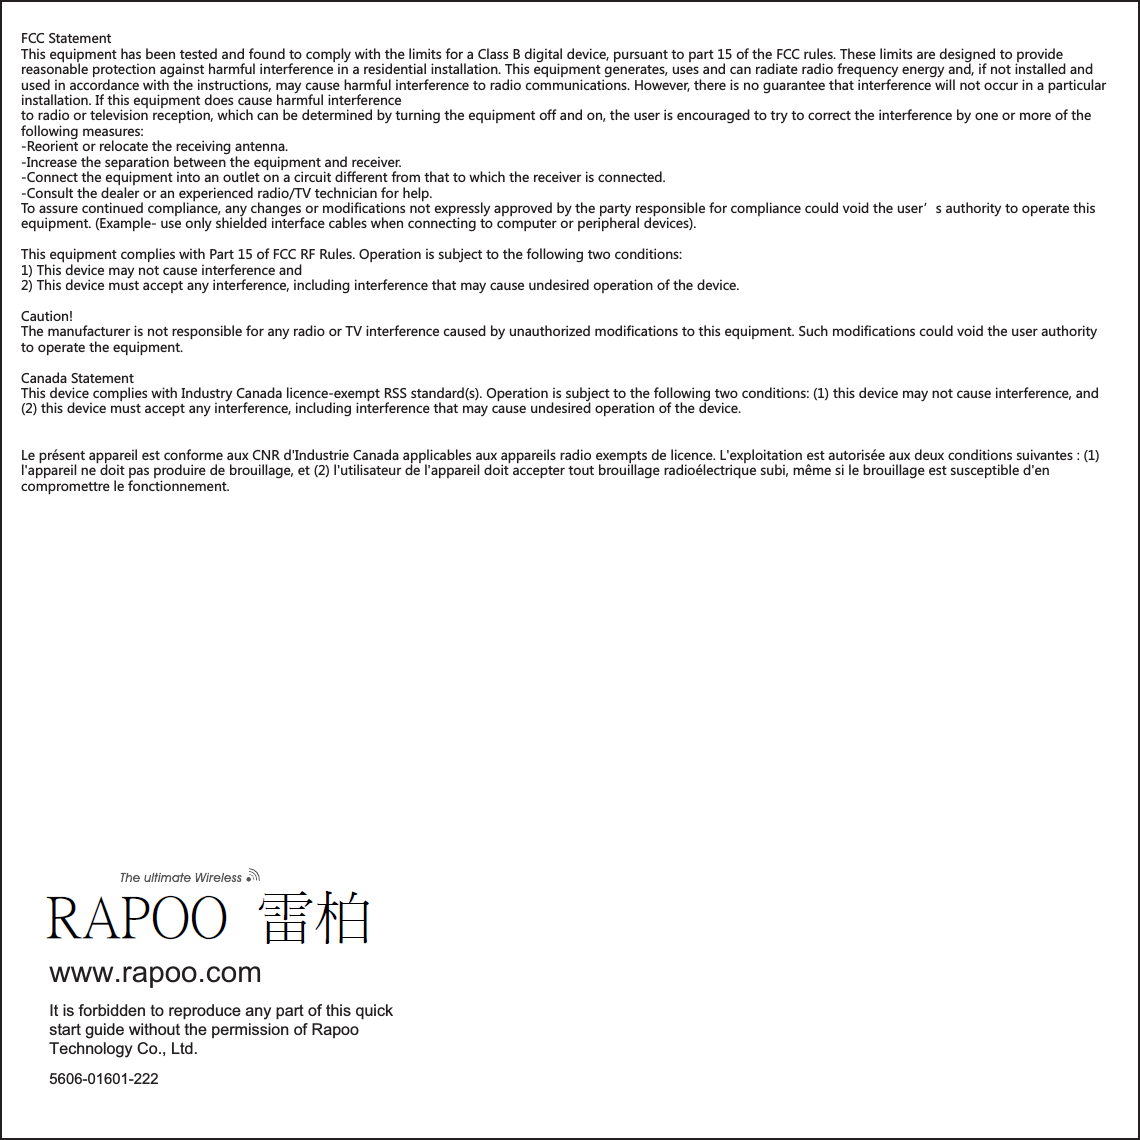 5606-01601-222www.rapoo.comIt is forbidden to reproduce any part of this quick start guide without the permission of Rapoo Technology Co., Ltd.FCC StatementThis equipment has been tested and found to comply with the limits for a Class B digital device, pursuant to part 15 of the FCC rules. These limits are designed to provide reasonable protection against harmful interference in a residential installation. This equipment generates, uses and can radiate radio frequency energy and, if not installed and used in accordance with the instructions, may cause harmful interference to radio communications. However, there is no guarantee that interference will not occur in a particular installation. If this equipment does cause harmful interference to radio or television reception, which can be determined by turning the equipment off and on, the user is encouraged to try to correct the interference by one or more of the following measures:-Reorient or relocate the receiving antenna.-Increase the separation between the equipment and receiver.-Connect the equipment into an outlet on a circuit different from that to which the receiver is connected.-Consult the dealer or an experienced radio/TV technician for help.To assure continued compliance, any changes or modifications not expressly approved by the party responsible for compliance could void the user’s authority to operate this equipment. (Example- use only shielded interface cables when connecting to computer or peripheral devices).This equipment complies with Part 15 of FCC RF Rules. Operation is subject to the following two conditions:1) This device may not cause interference and2) This device must accept any interference, including interference that may cause undesired operation of the device.Caution!The manufacturer is not responsible for any radio or TV interference caused by unauthorized modifications to this equipment. Such modifications could void the user authority to operate the equipment. Canada Statement  This device complies with Industry Canada licence-exempt RSS standard(s). Operation is subject to the following two conditions: (1) this device may not cause interference, and (2) this device must accept any interference, including interference that may cause undesired operation of the device. Le présent appareil est conforme aux CNR d&apos;Industrie Canada applicables aux appareils radio exempts de licence. L&apos;exploitation est autorisée aux deux conditions suivantes : (1) l&apos;appareil ne doit pas produire de brouillage, et (2) l&apos;utilisateur de l&apos;appareil doit accepter tout brouillage radioélectrique subi, même si le brouillage est susceptible d&apos;en compromettre le fonctionnement.